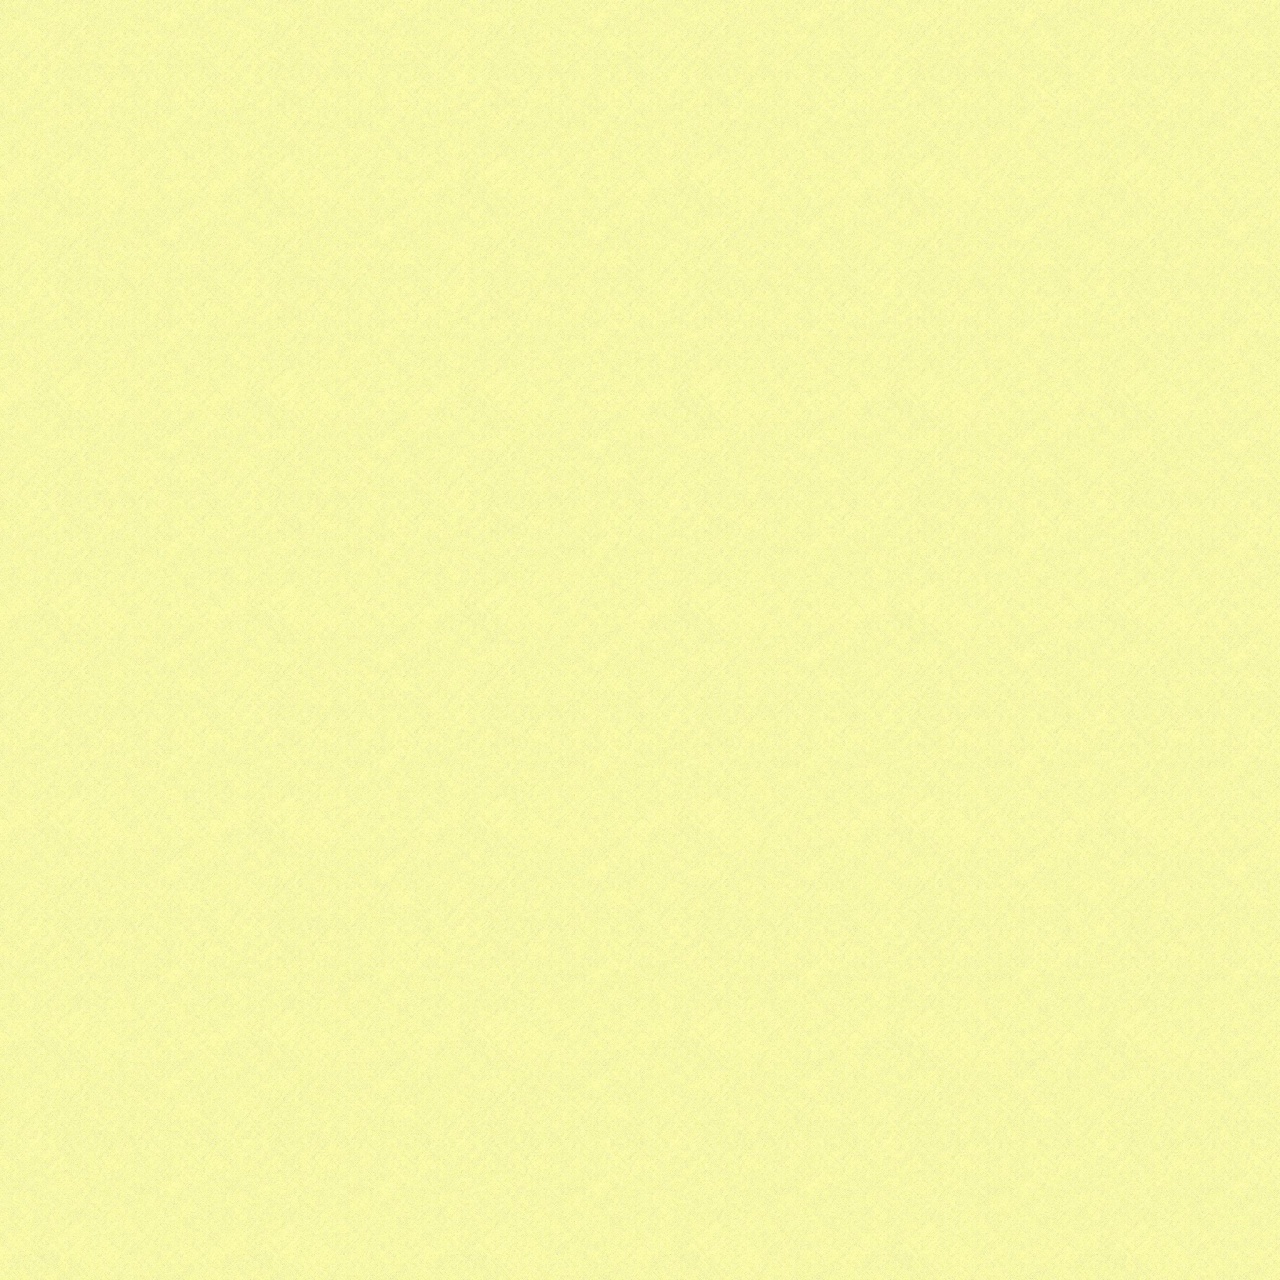 Pale Yellow Background